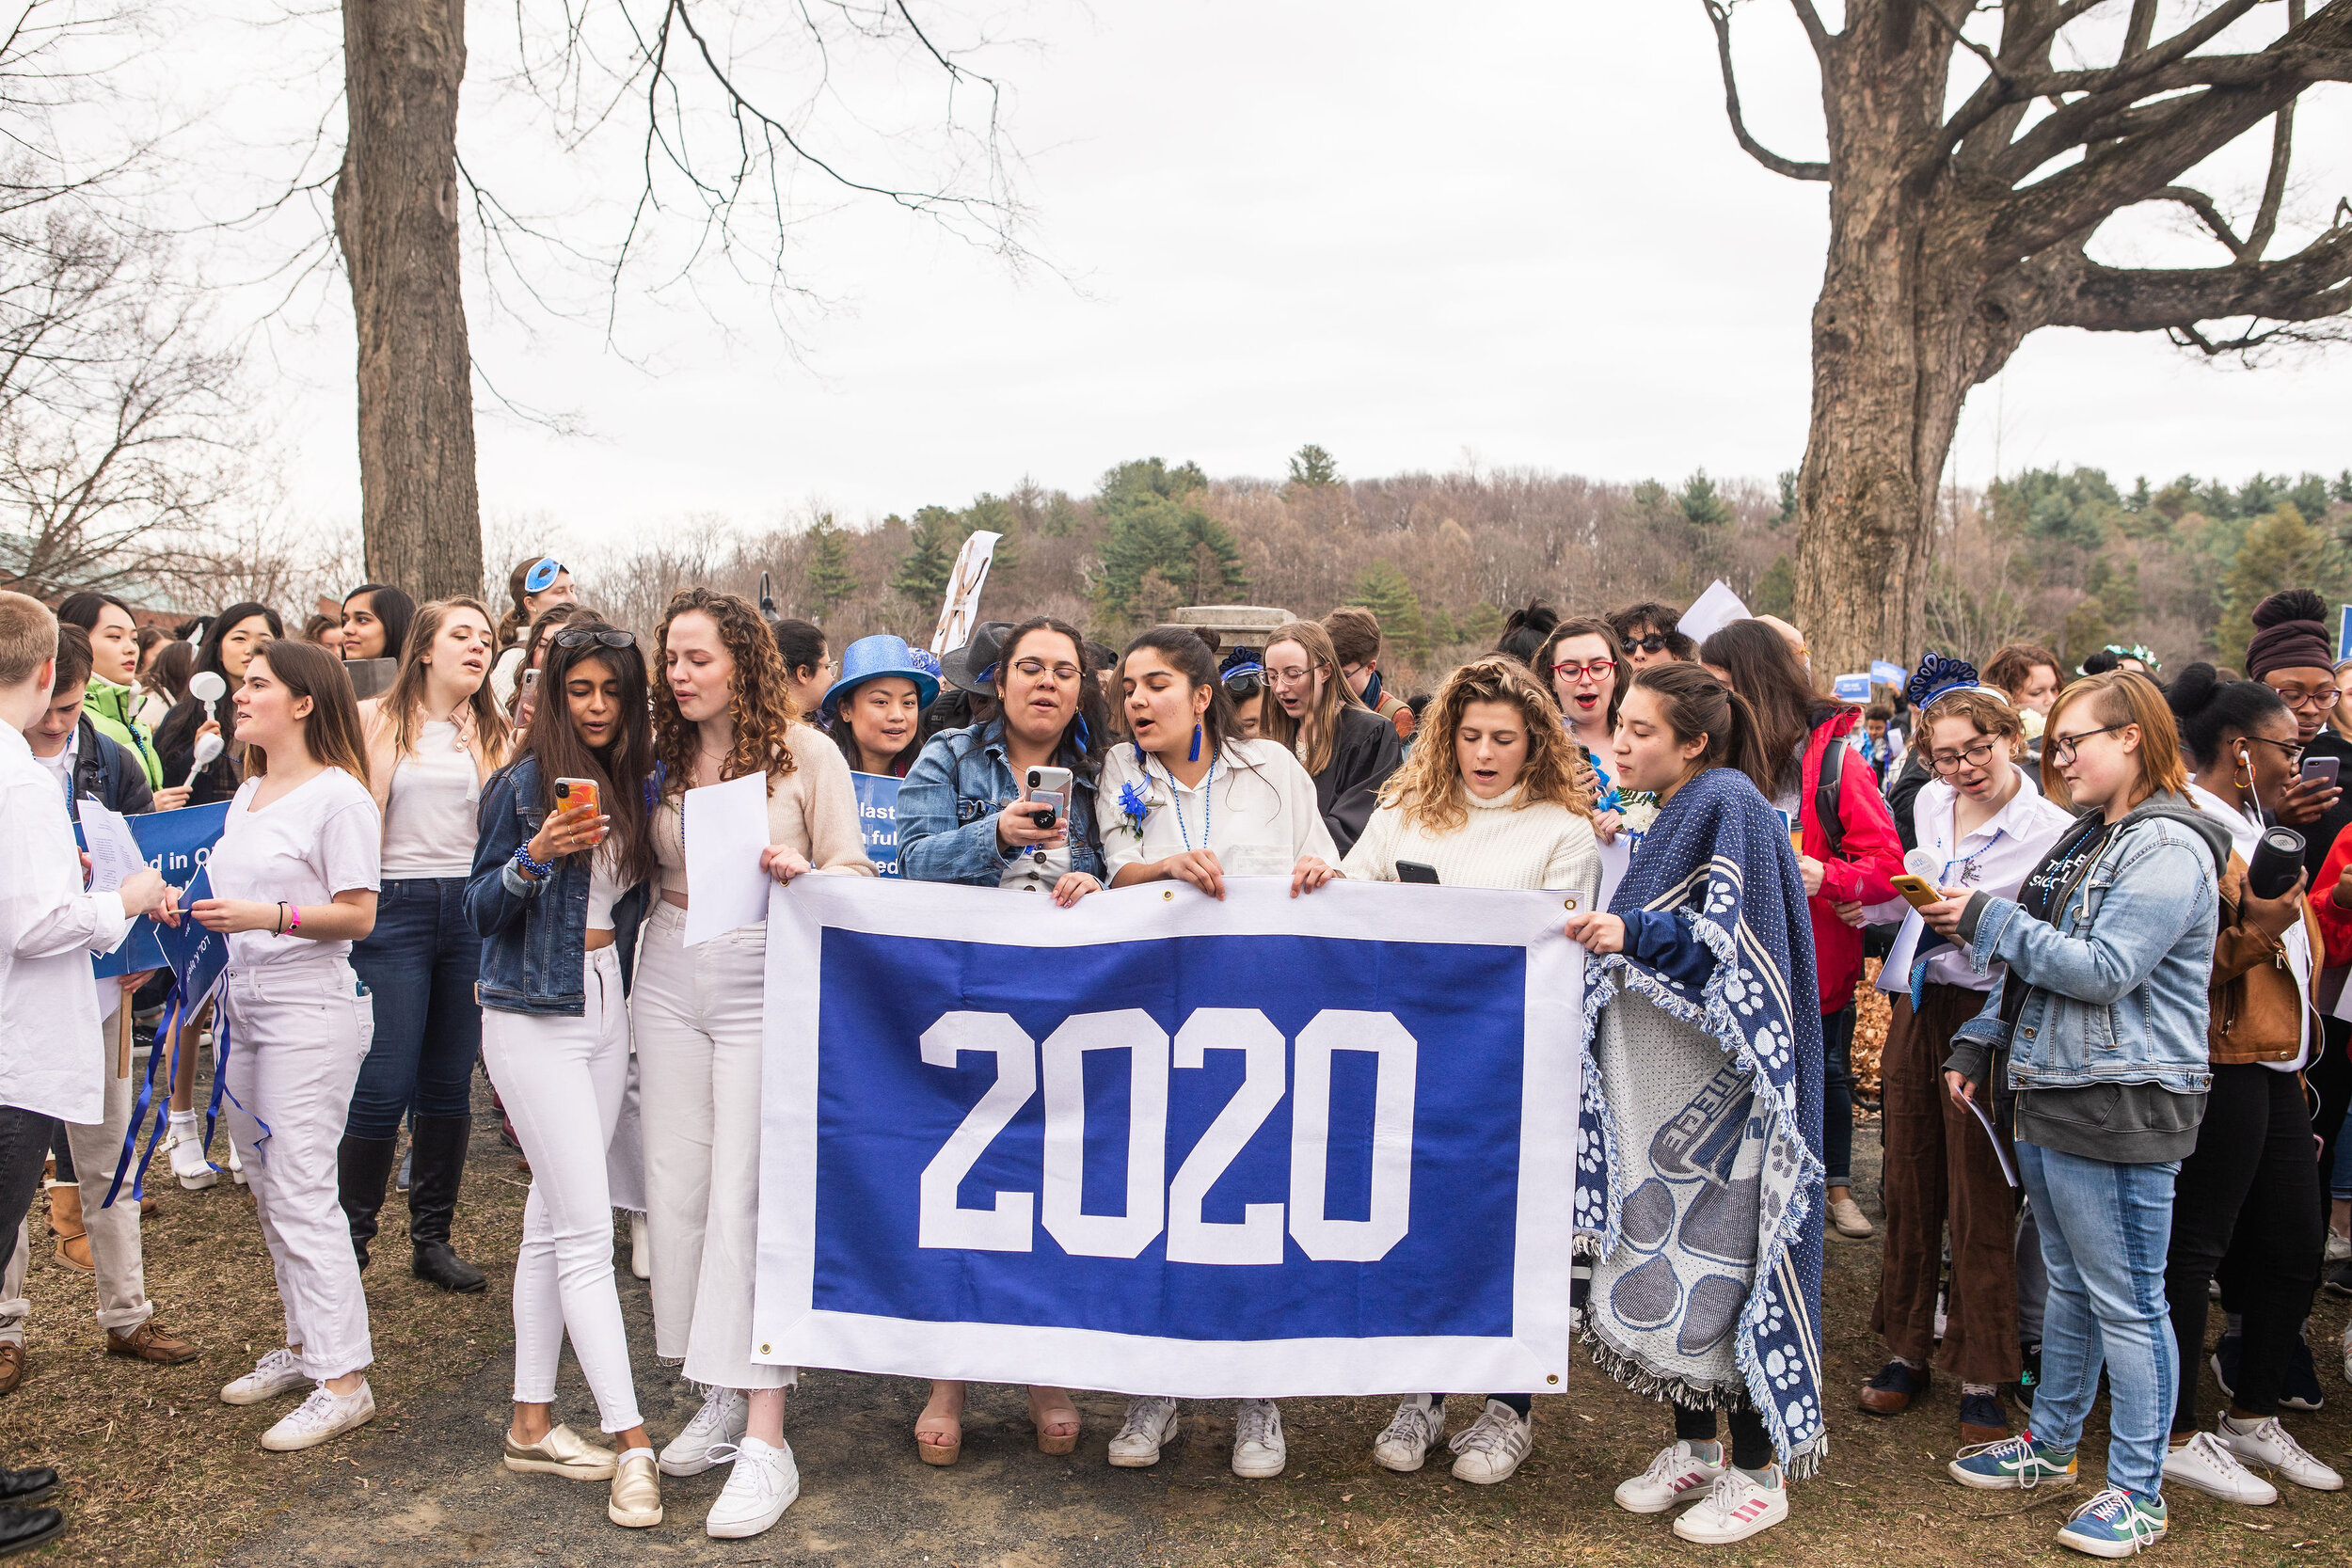  “I love this class,” said Vice President for Student Life and Dean of Students Marcella Runell Hall. “I remember giving the opening remarks to the 2020 class in 2016 — for most of them, although there are transfers and others who didn’t come in then